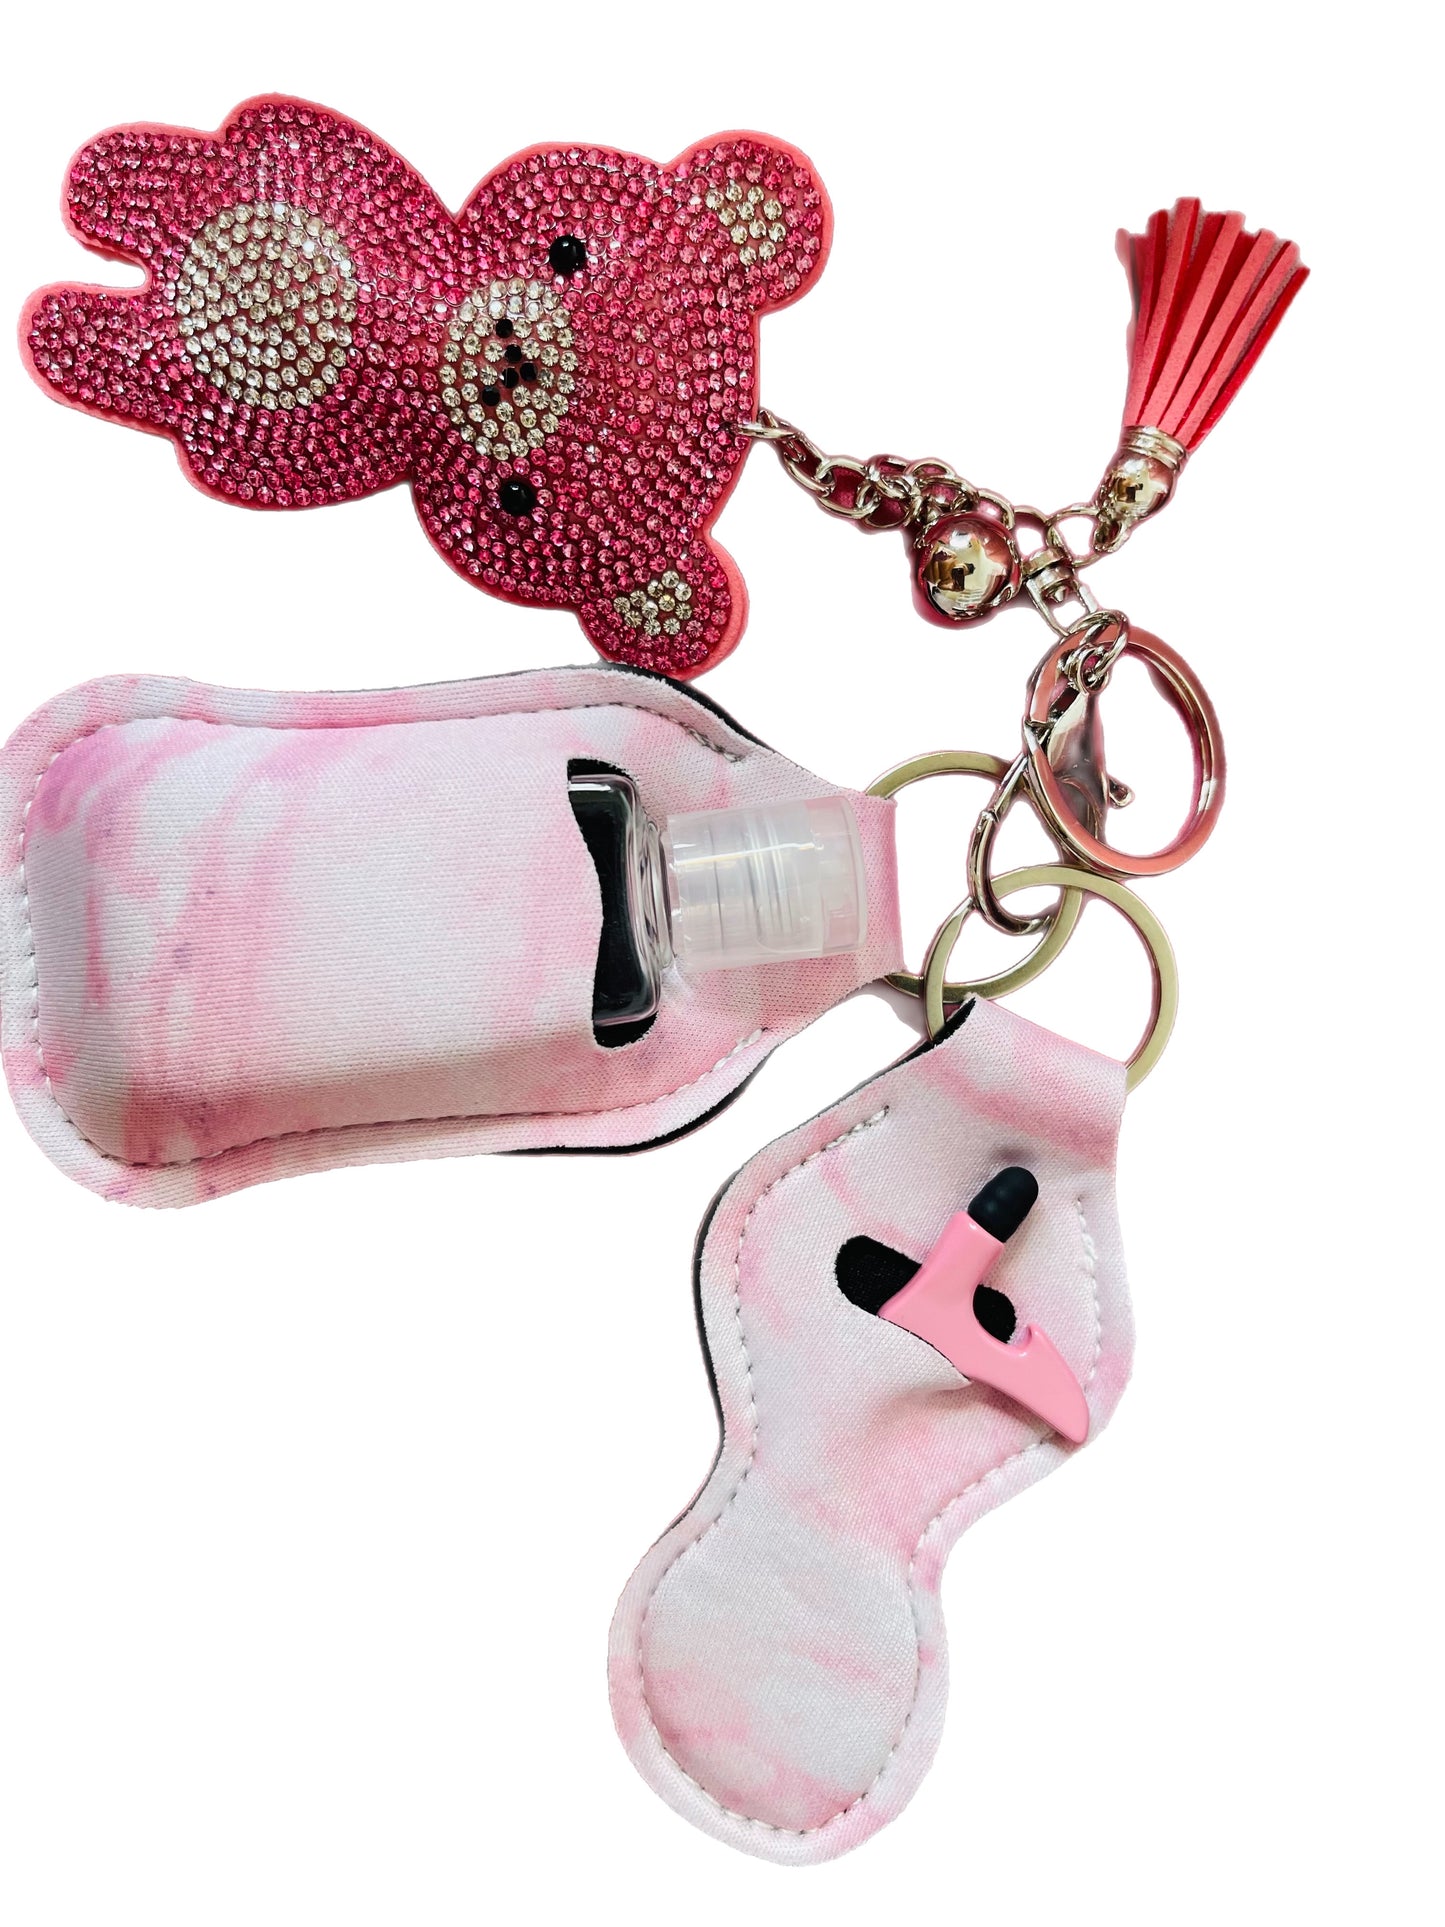 Bling accessories keychain